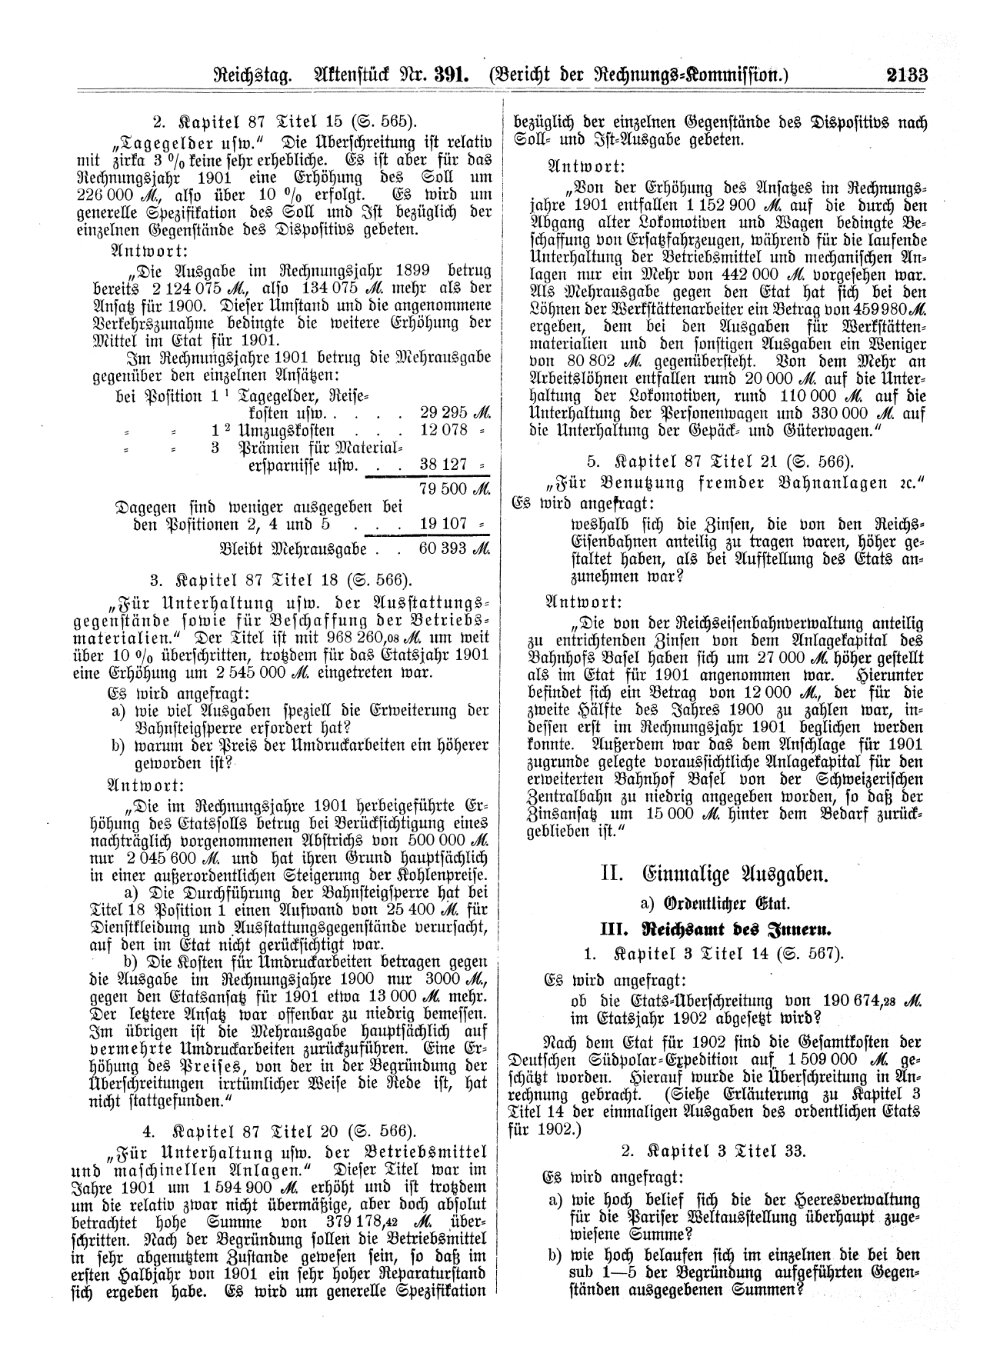 Scan of page 2133